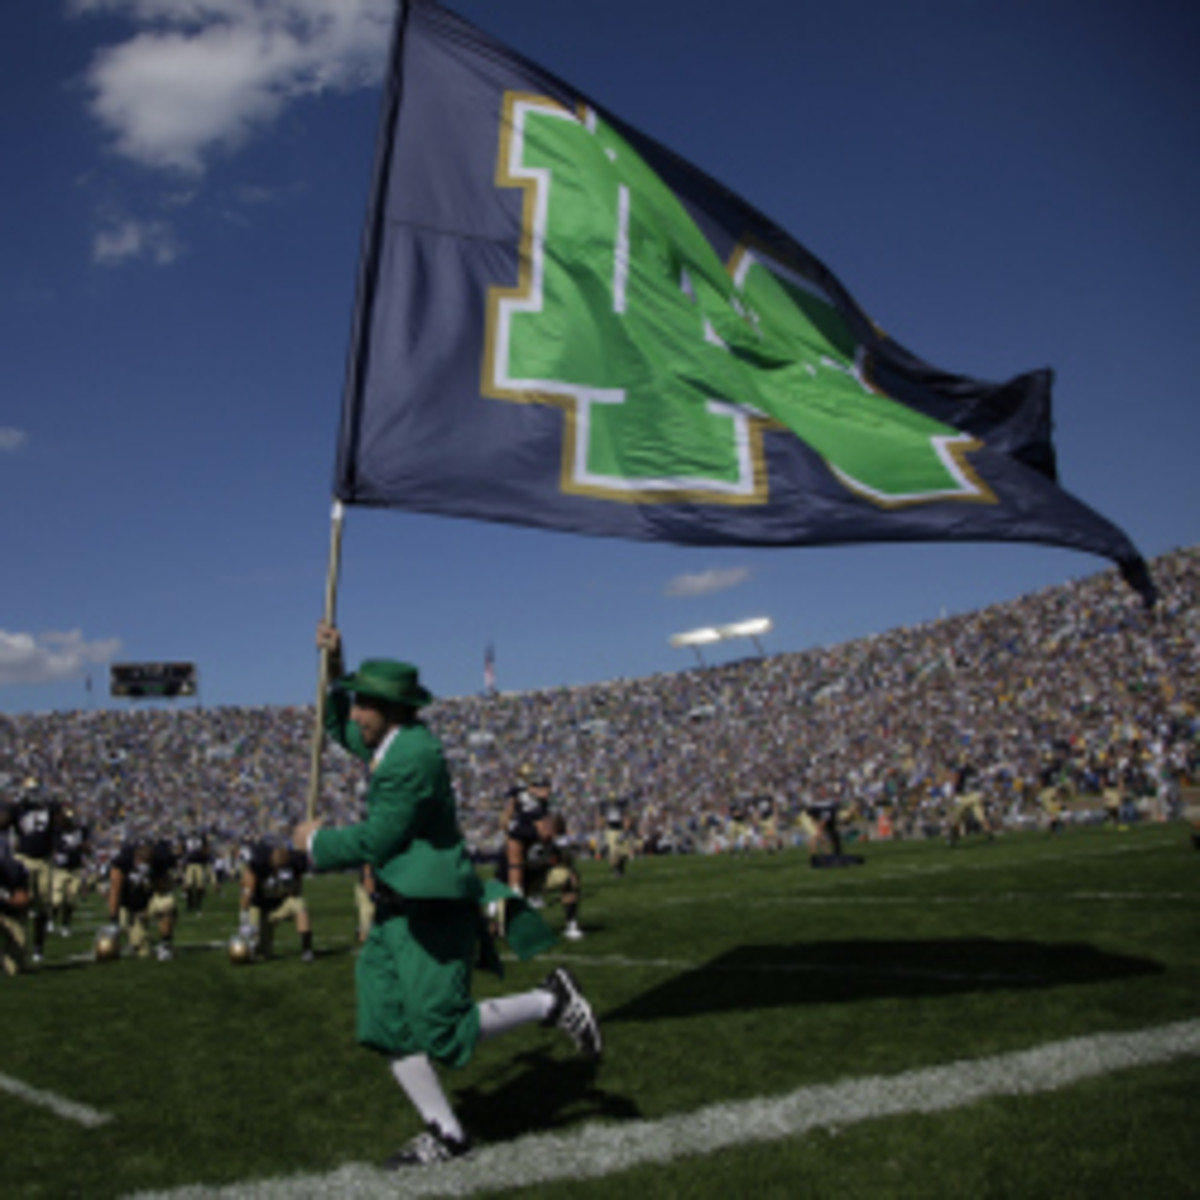 NBC has renewed its football partnership with Notre Dame through 2025, bringing the total to 35 years. (John Gress/Getty Images)